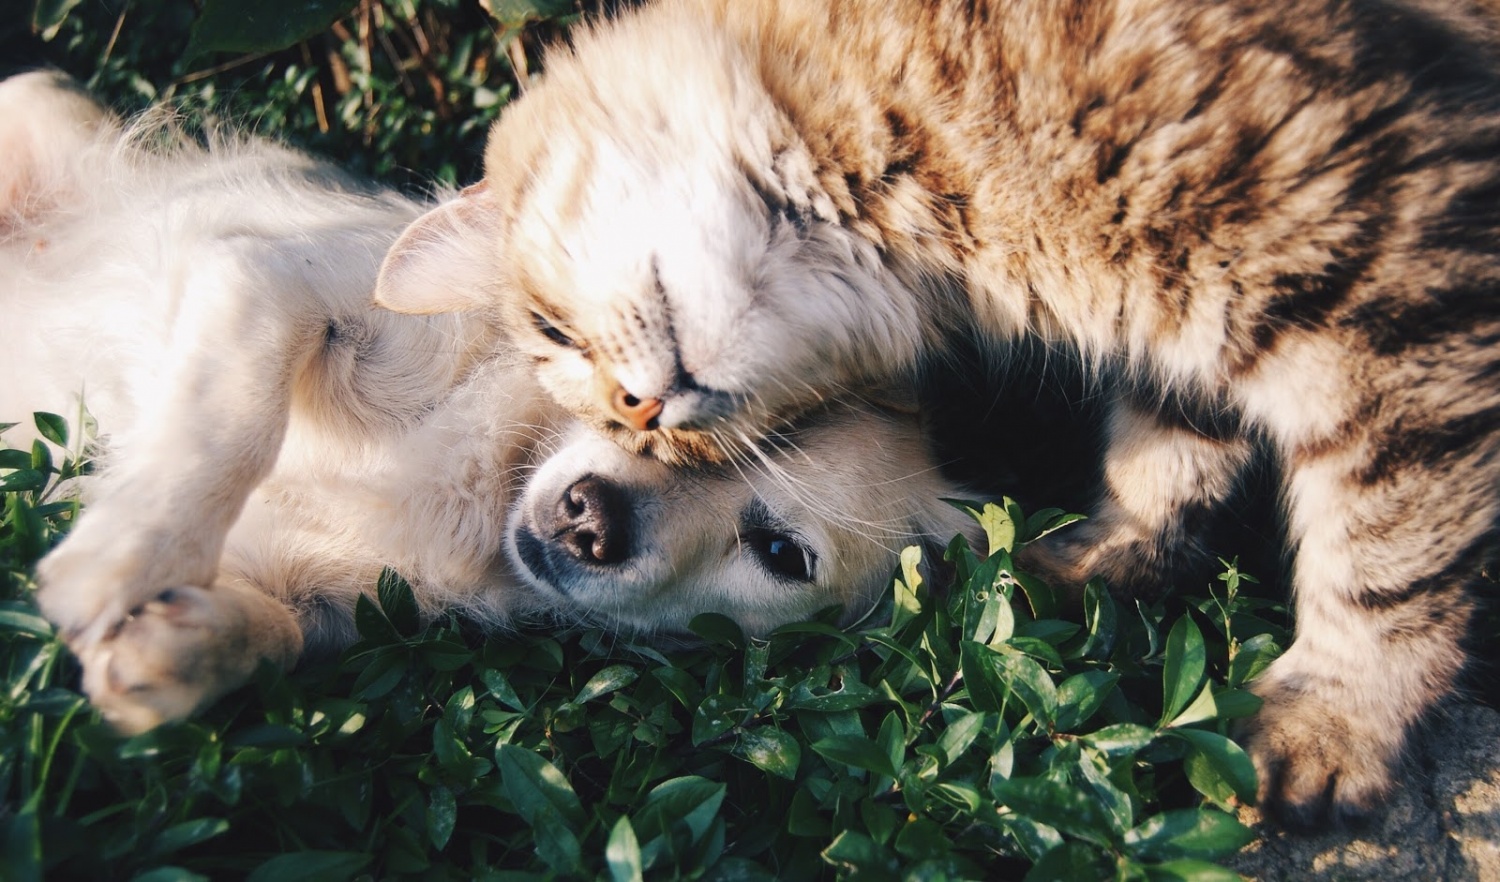 5 Ways to Reduce Your Pet’s Anxiety and Stress